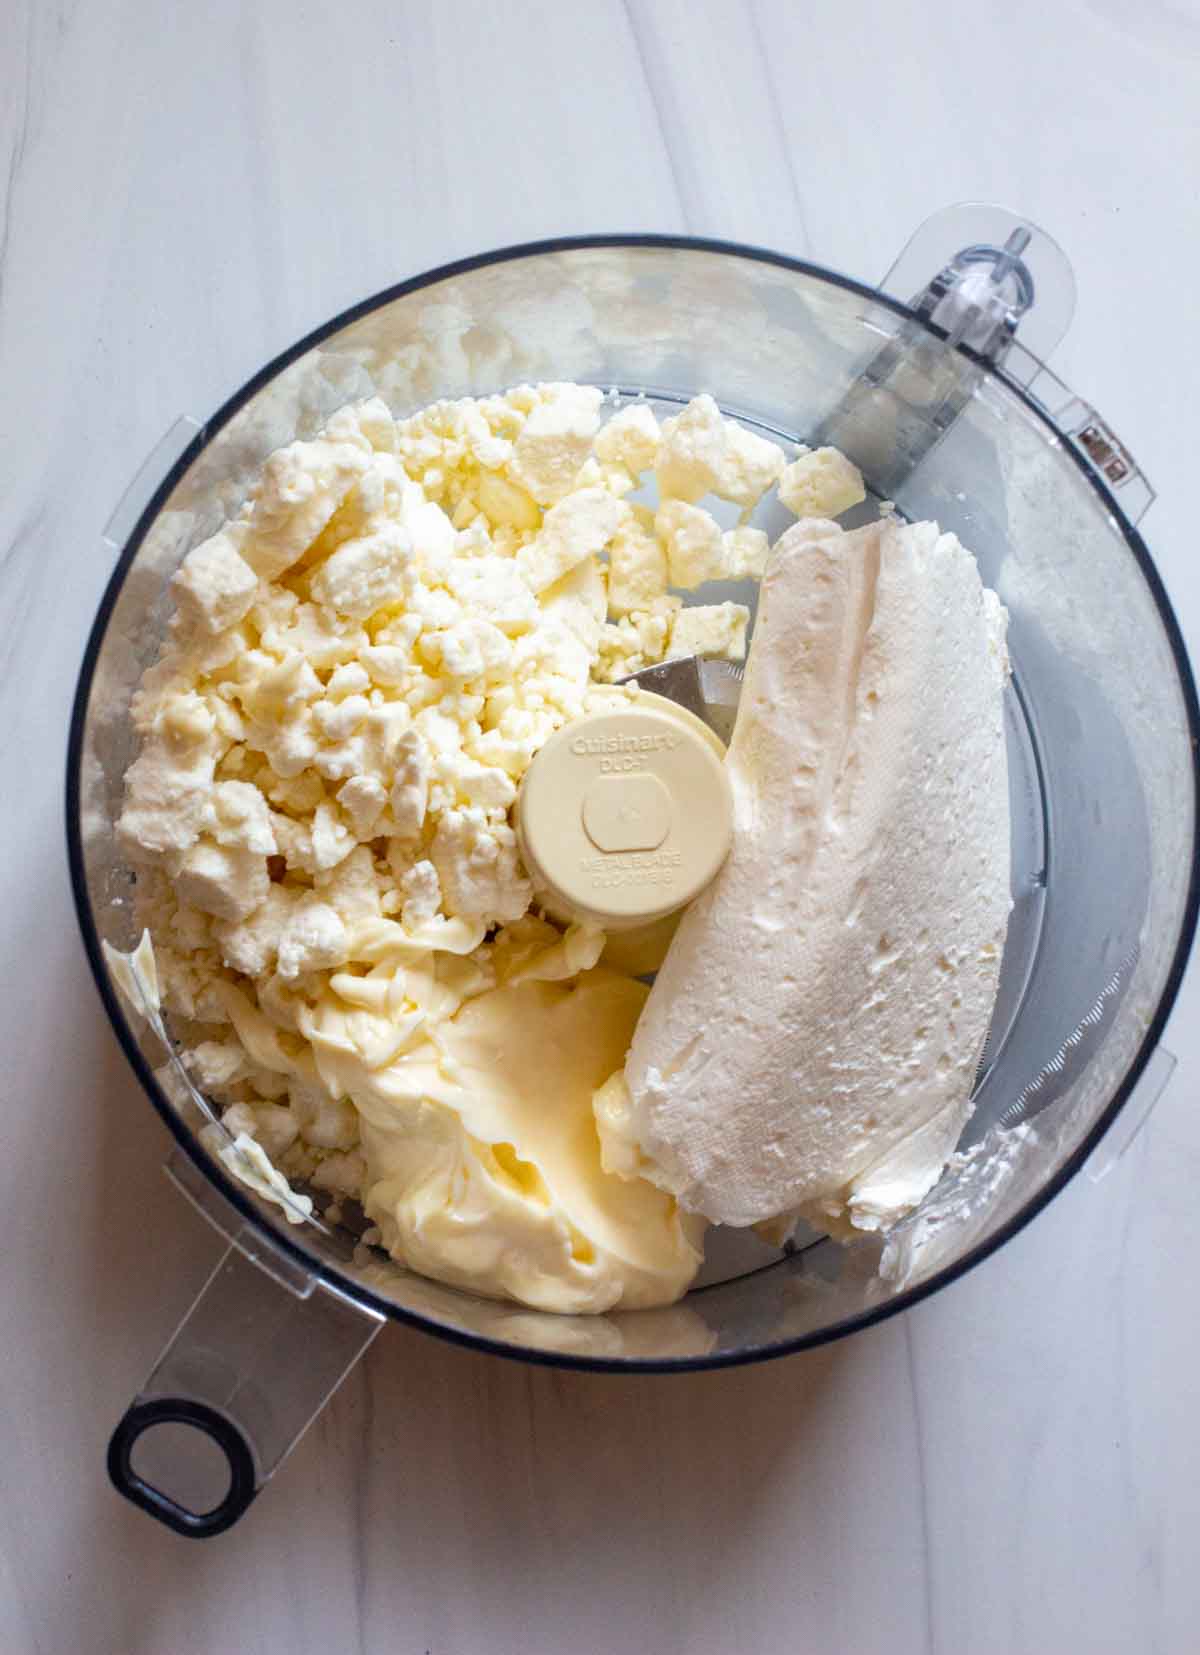 Blending feta cheese and cream cheese in a food processor.